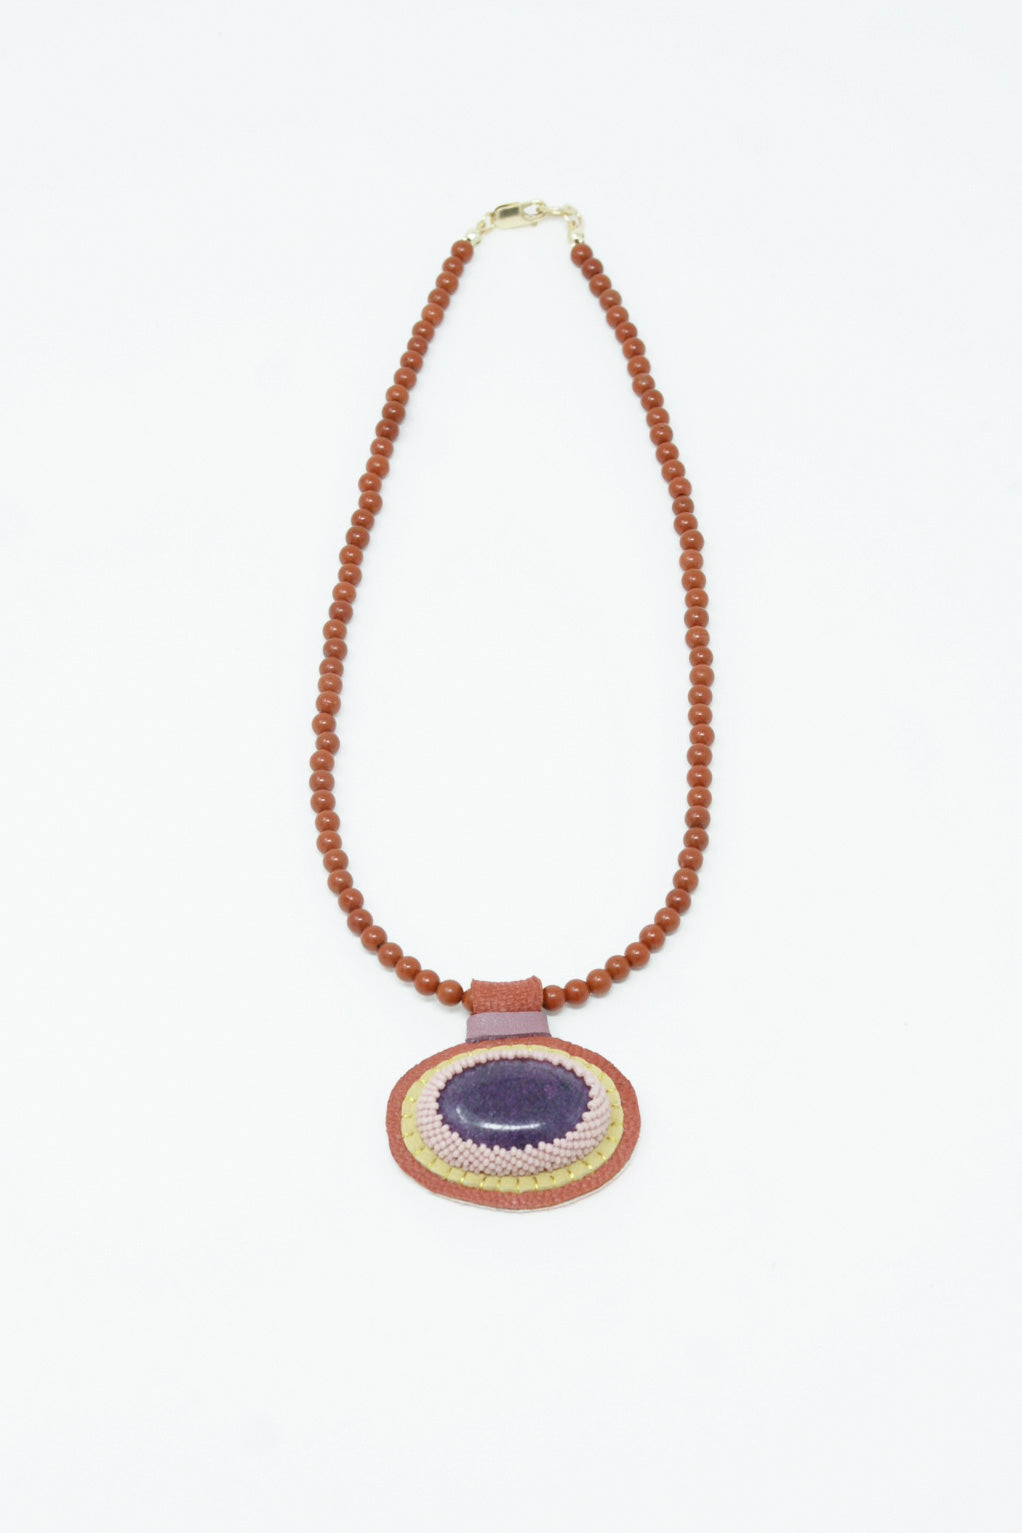 A Robin Mollicone Charm Necklace in Red Jasper Beads and Purpurite Charm adorned with a wooden bead.